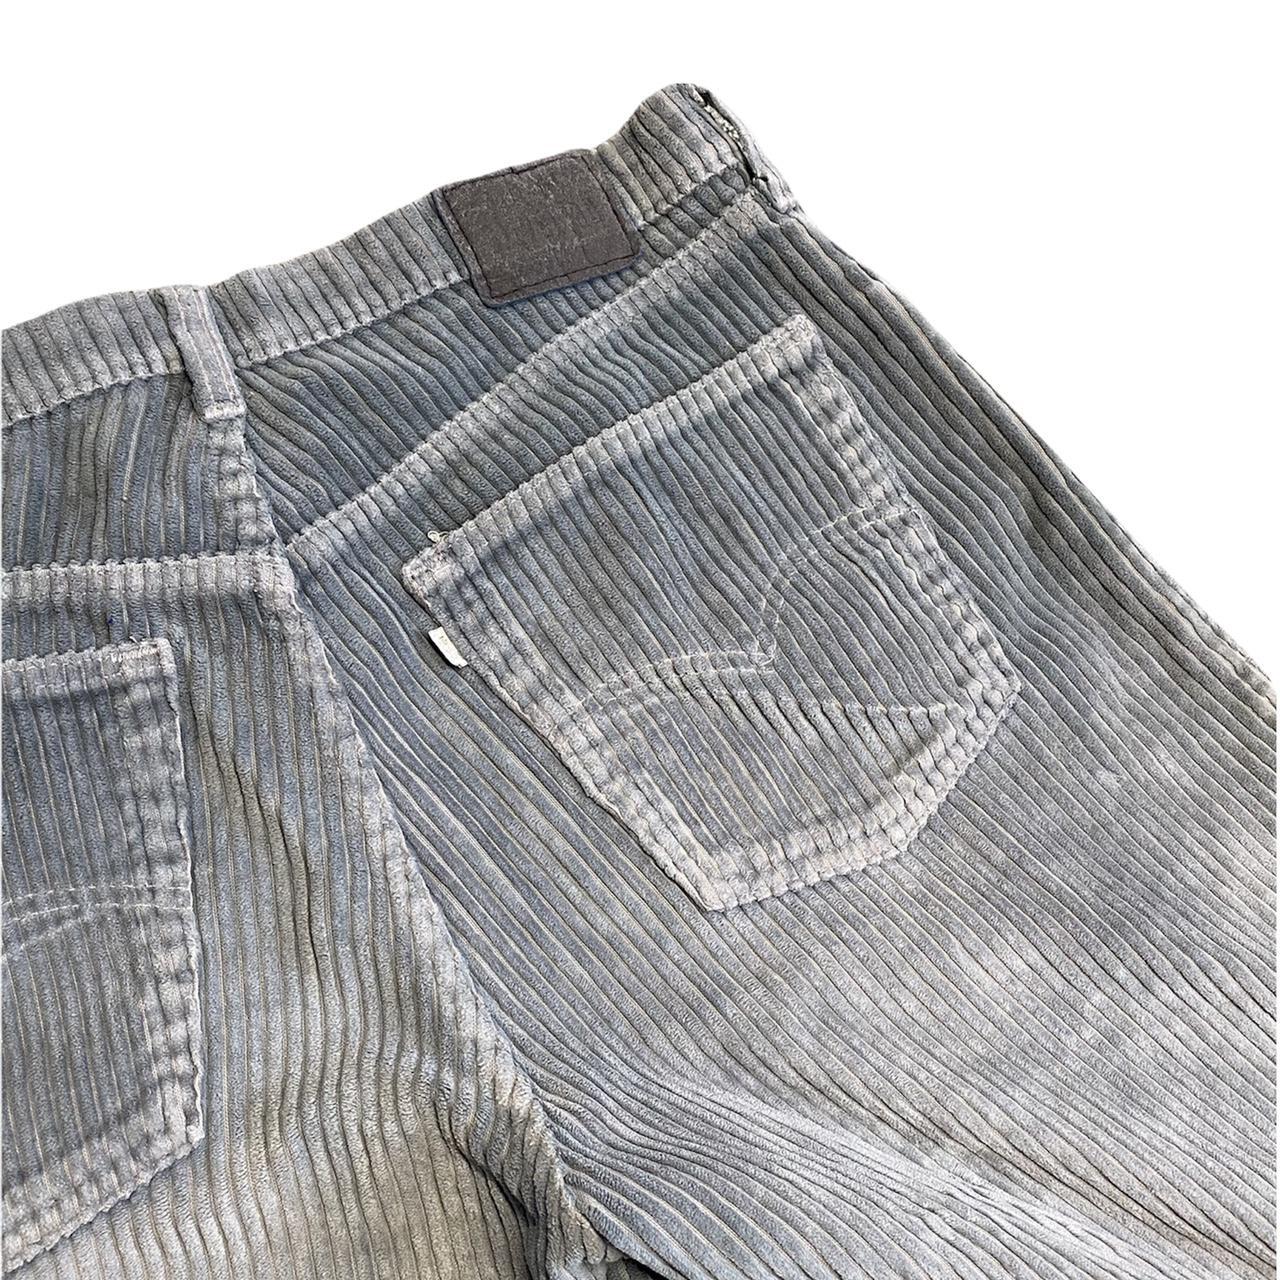 Product Image 4 - VINTAGE Grey Levi’s SilverTab Baggy